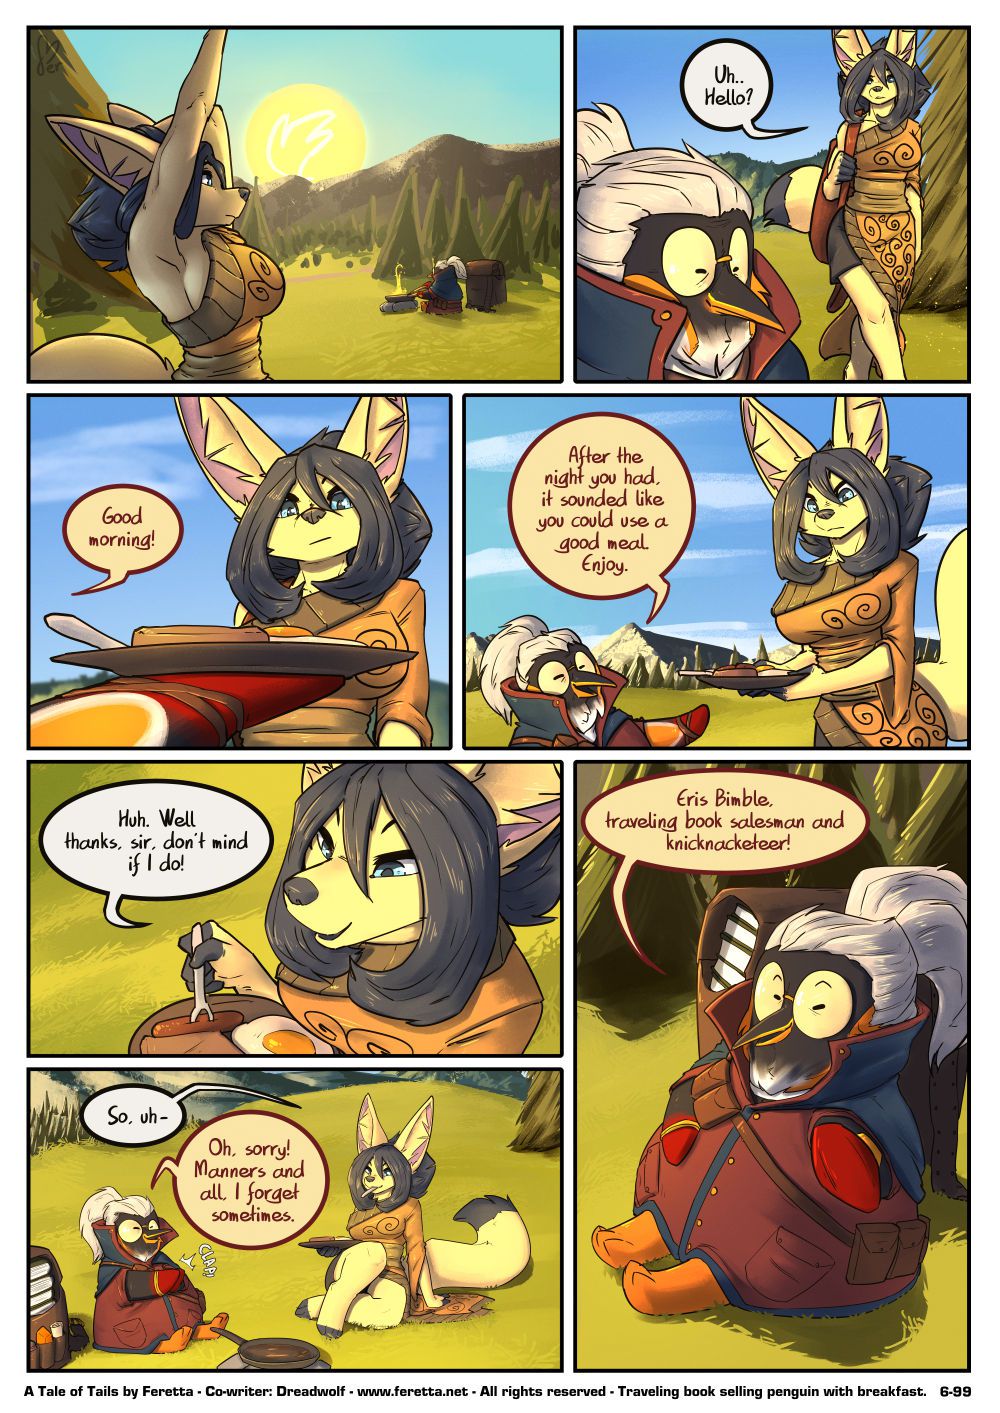 [Feretta] Farellian Legends: A Tale of Tails (w/Extras) [Ongoing] 394